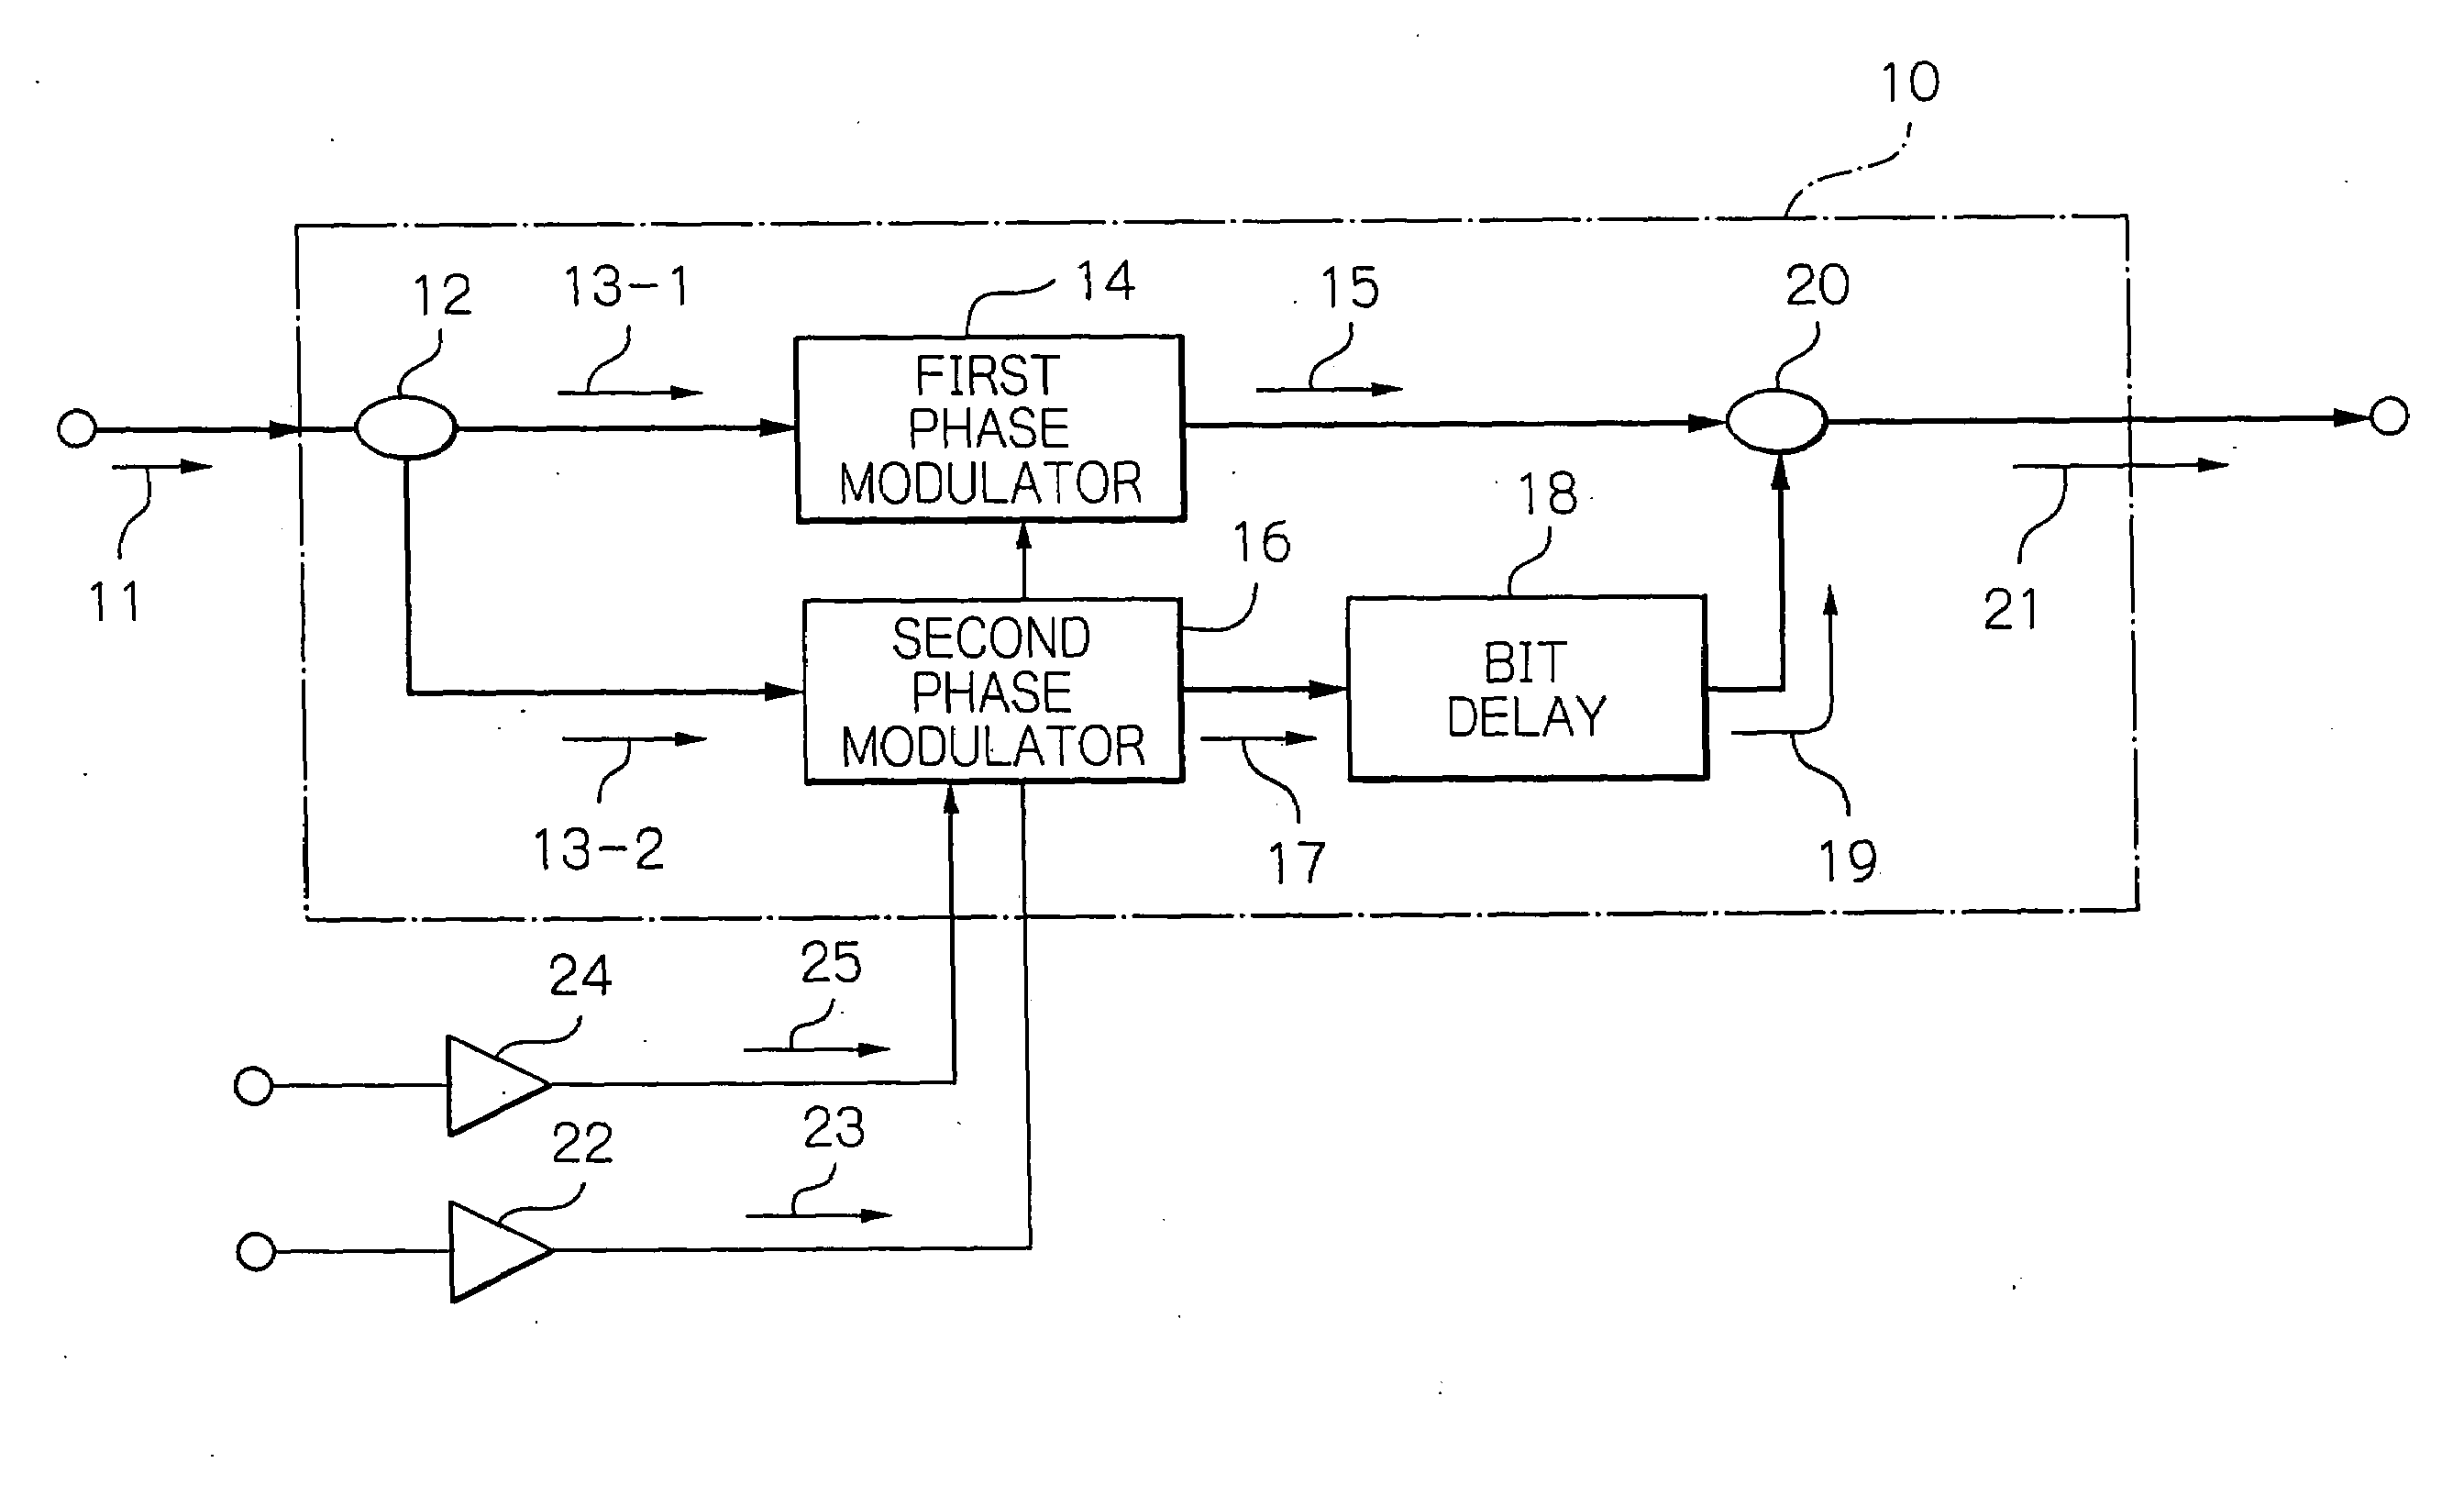 OTDM-DPSK signal generator capable of detecting an optical carrier phase difference between optical pulses